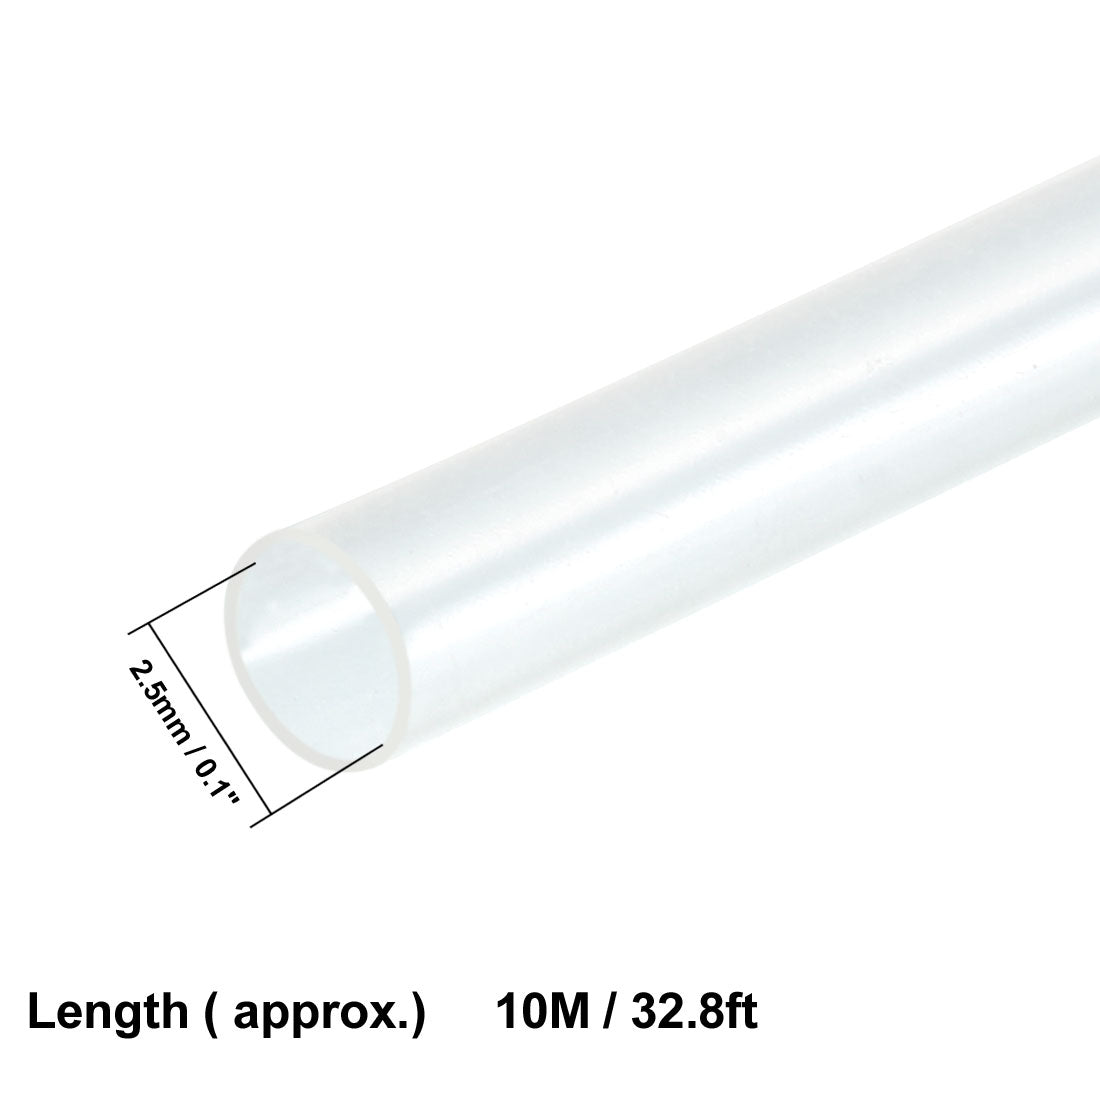 uxcell Uxcell Heat Shrink Tube 2:1 Electrical Insulation Tube Wire Cable Tubing Sleeving Wrap Clear 2.5mm Diameter 10m Long